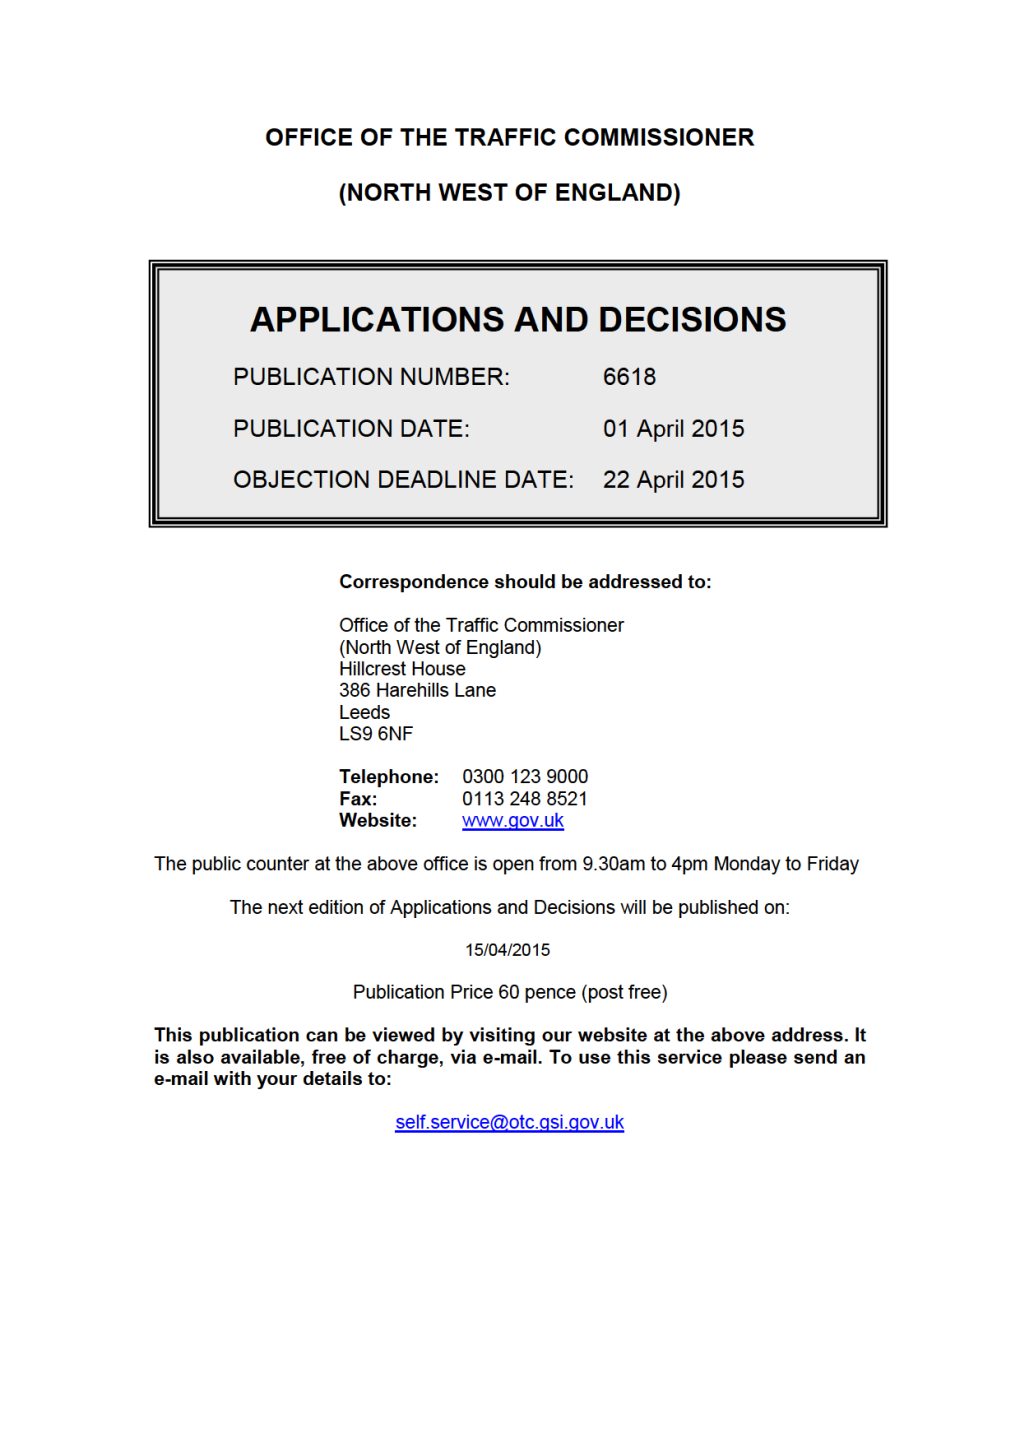 APPLICATIONS and DECISIONS 1 April 2015